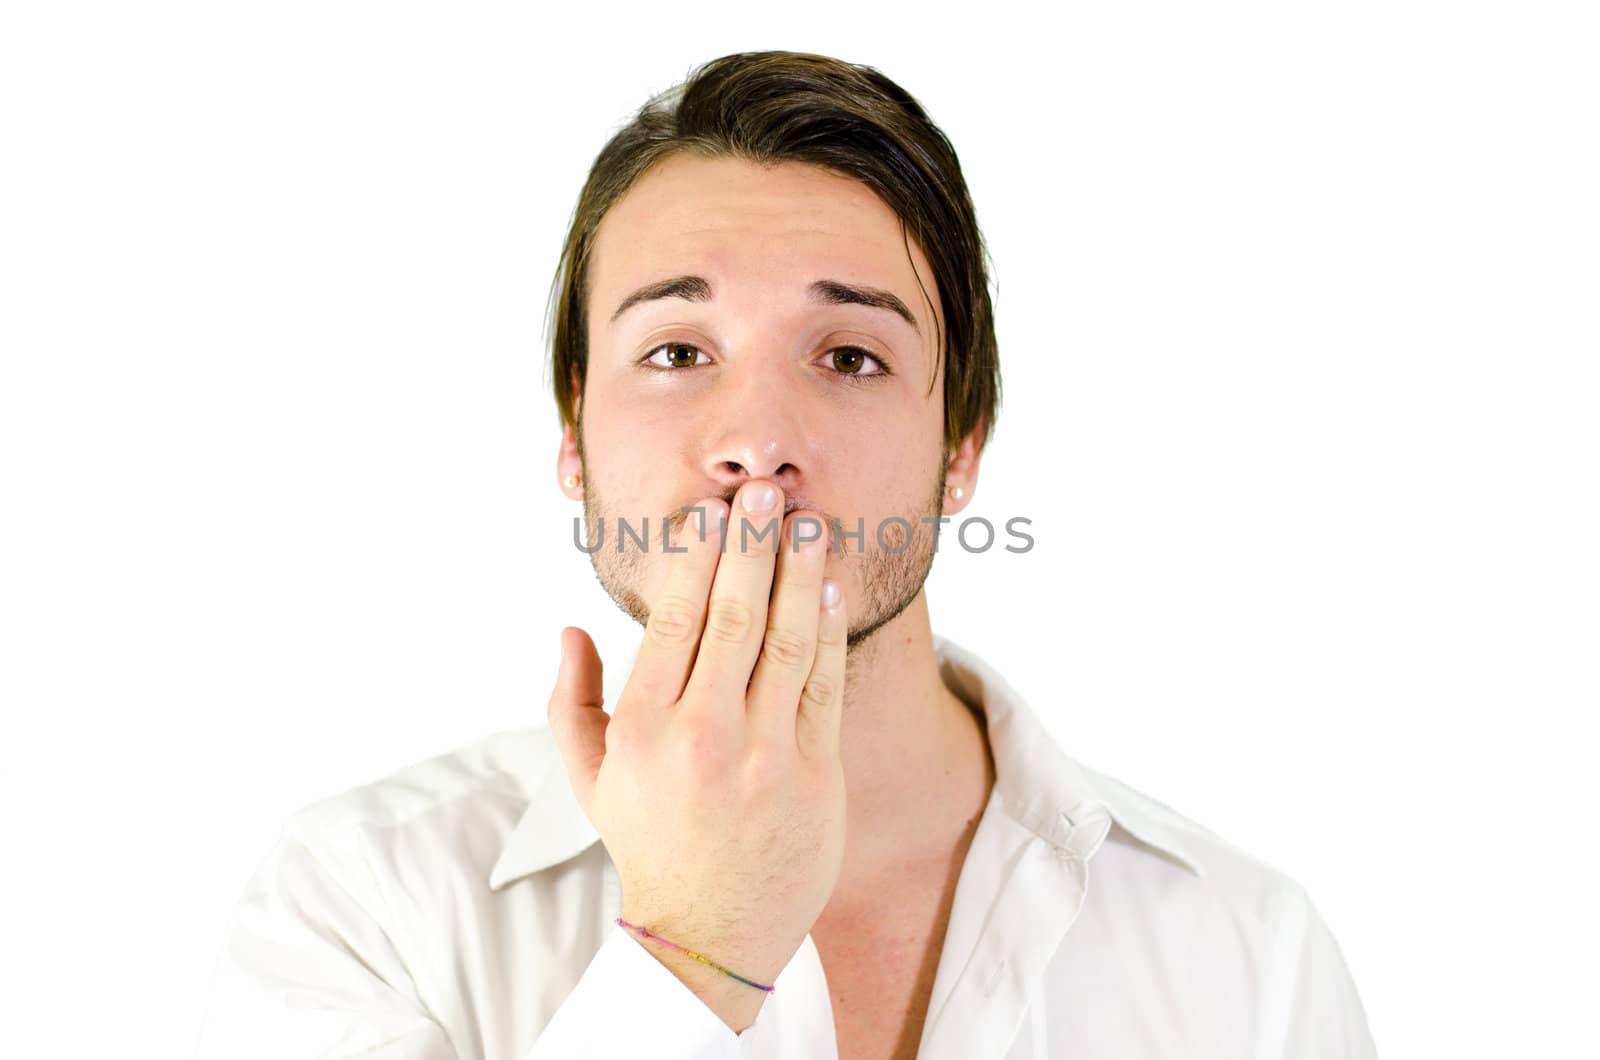 Young man covering mouth with hand, should not speak by artofphoto